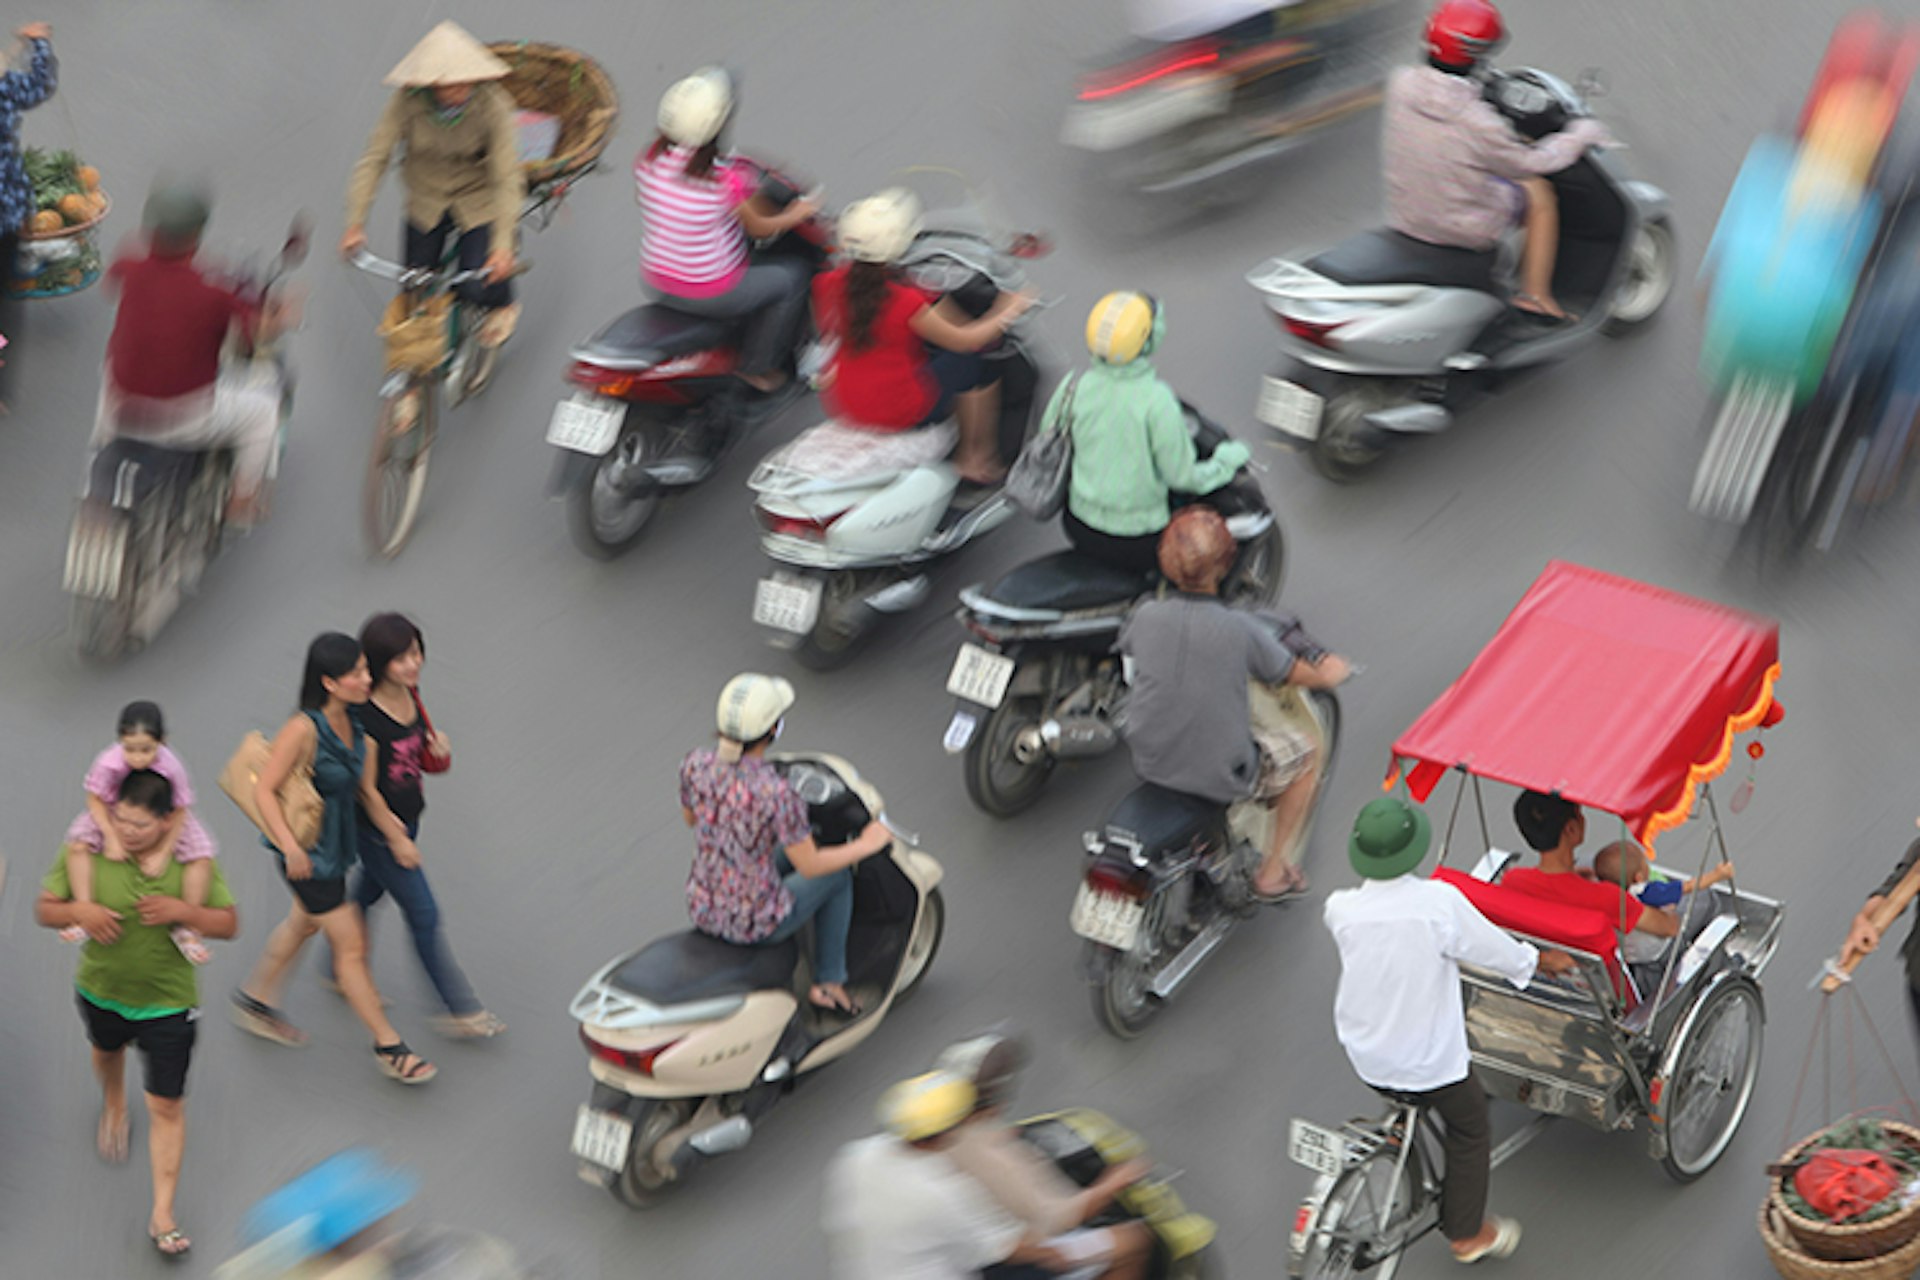 Don't dither when you're crossing the road in Vietnam. Image by Per-Andre Hoffmann / Picture Press / Getty Images